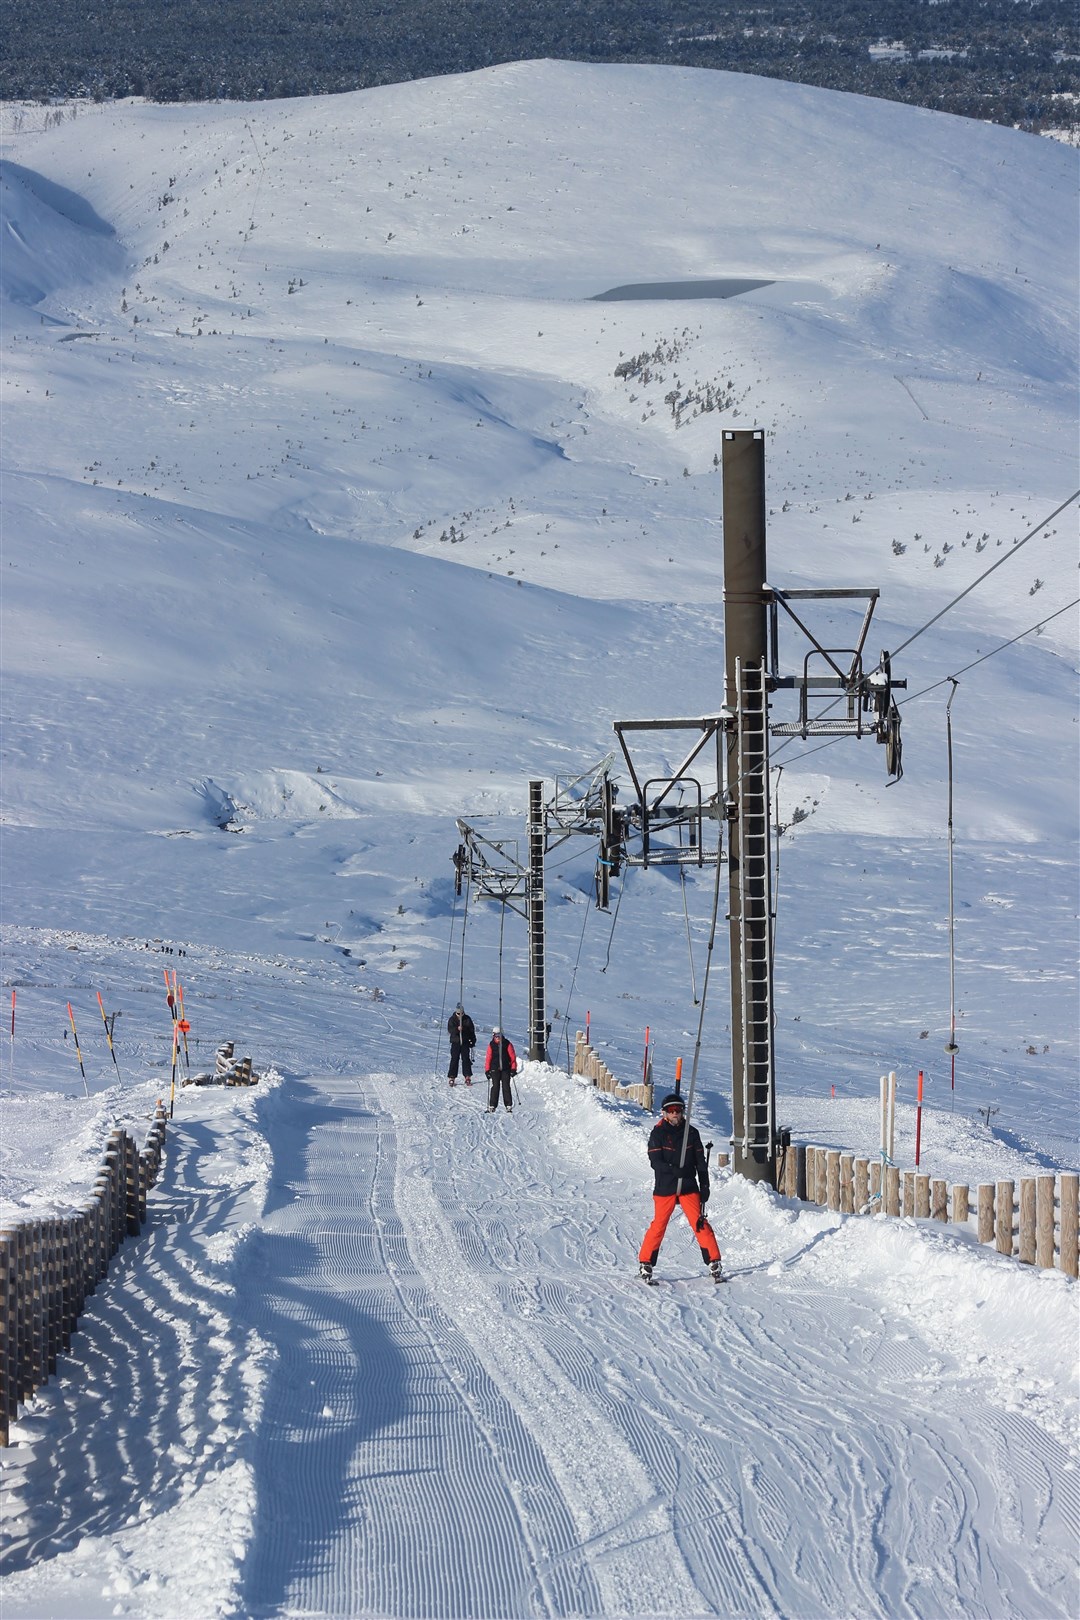 There have been excellent snow conditions at Cairngorm Mountain in recent weeks.